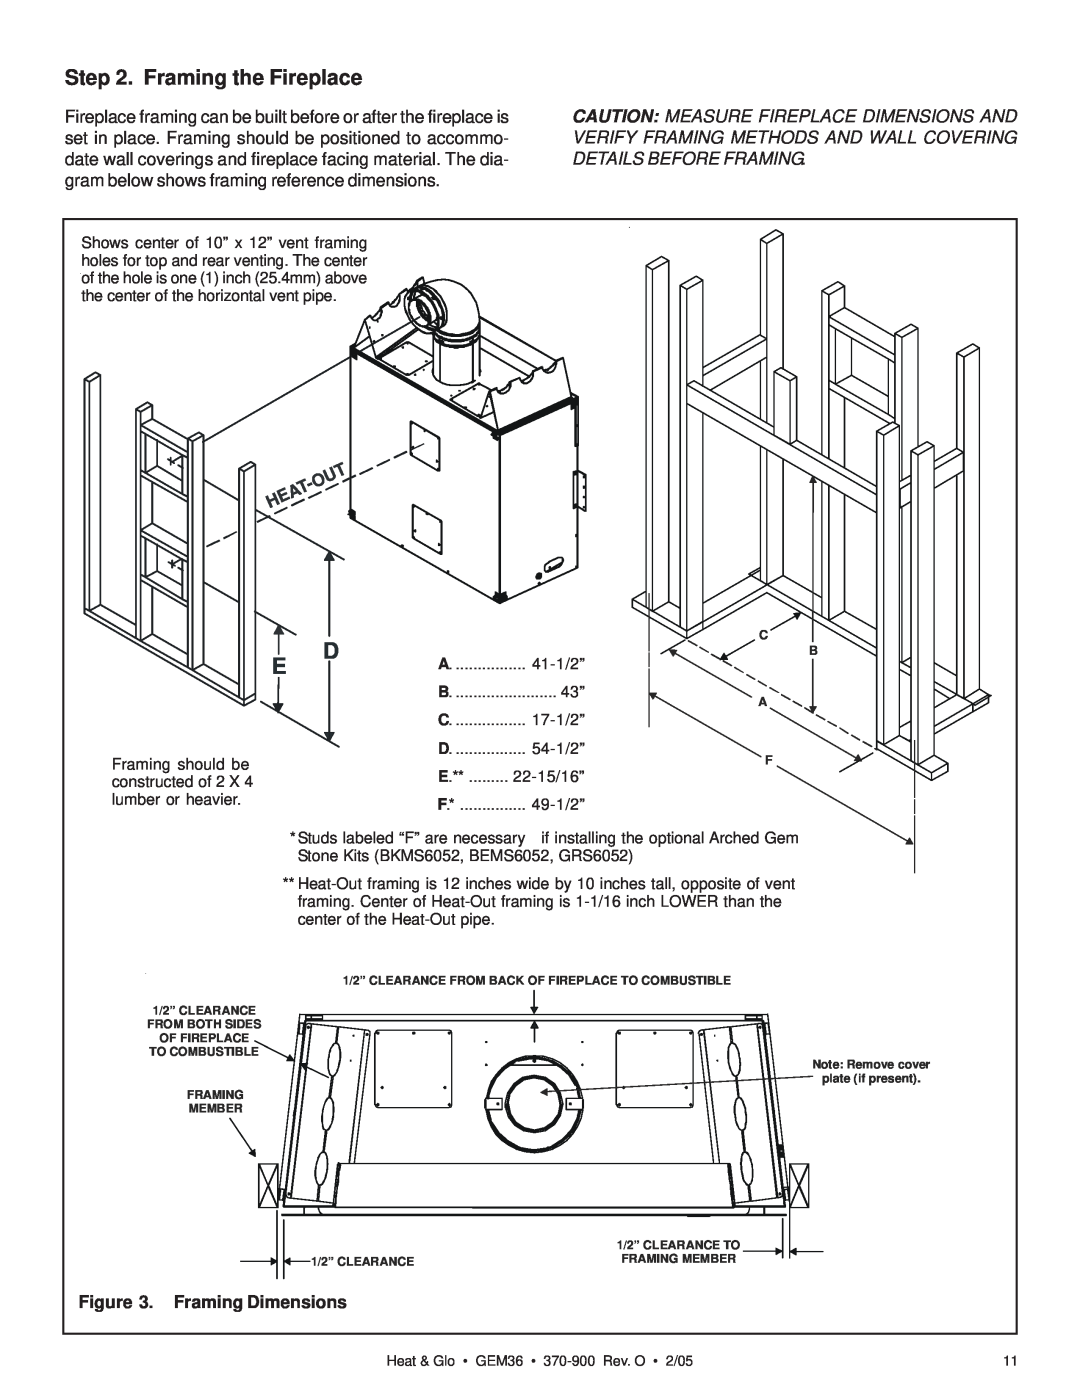 Heat & Glo LifeStyle GEM36 manual Framing the Fireplace, Framing Dimensions, 41-1/2”, 17-1/2”, 54-1/2”, 22-15/16”, 49-1/2” 